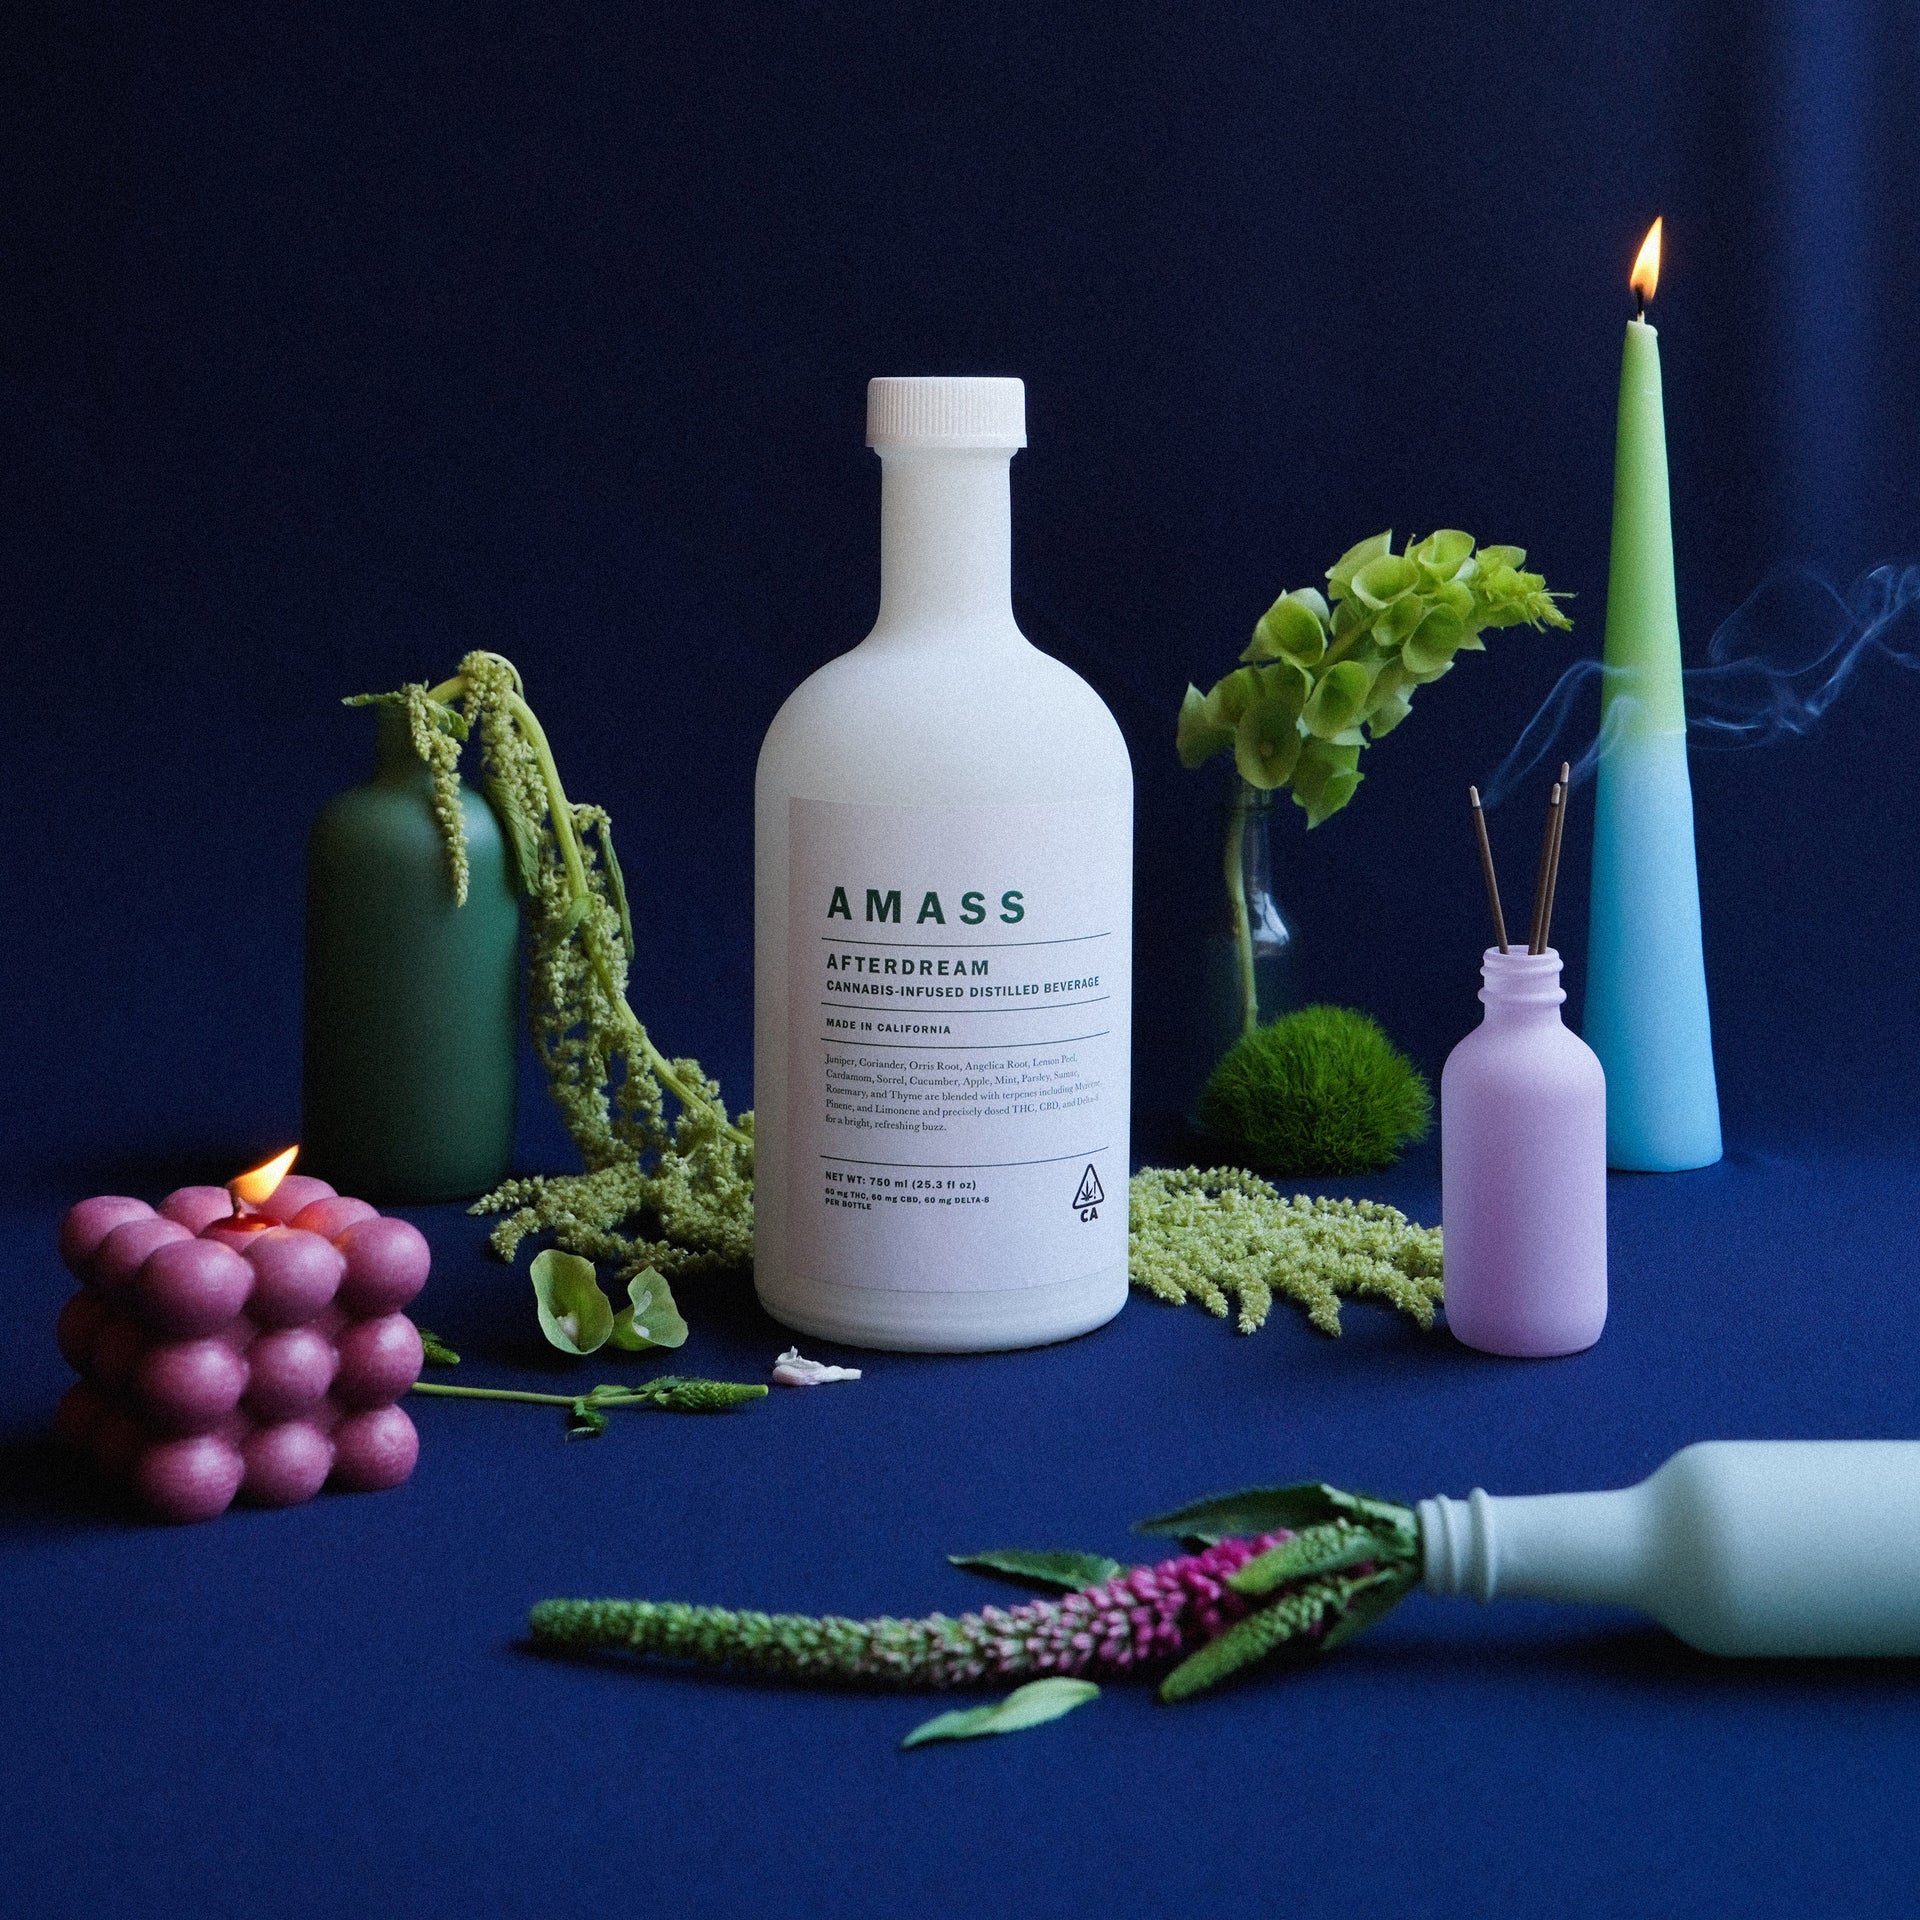 Amass Afterdream distilled thc spirit in a white bottle with green label.